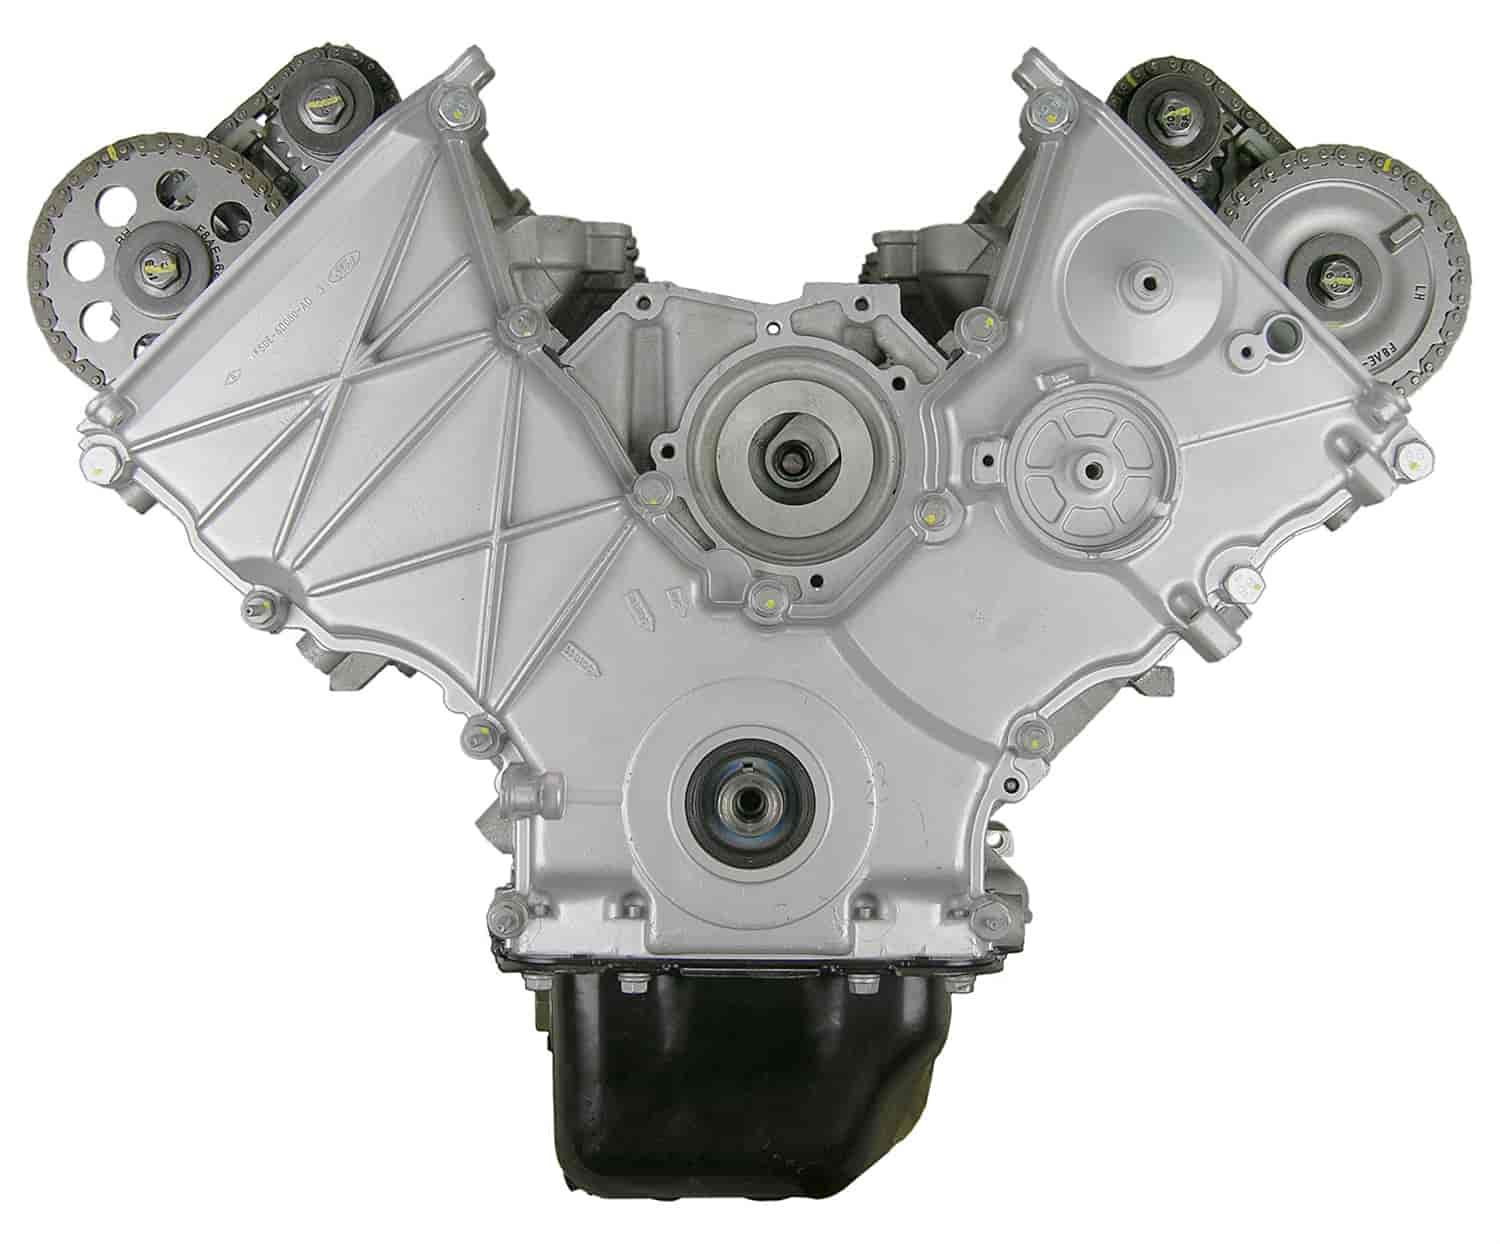 Remanufactured Crate Engine for 1997-1998 Lincoln Continental with 4.6L V8